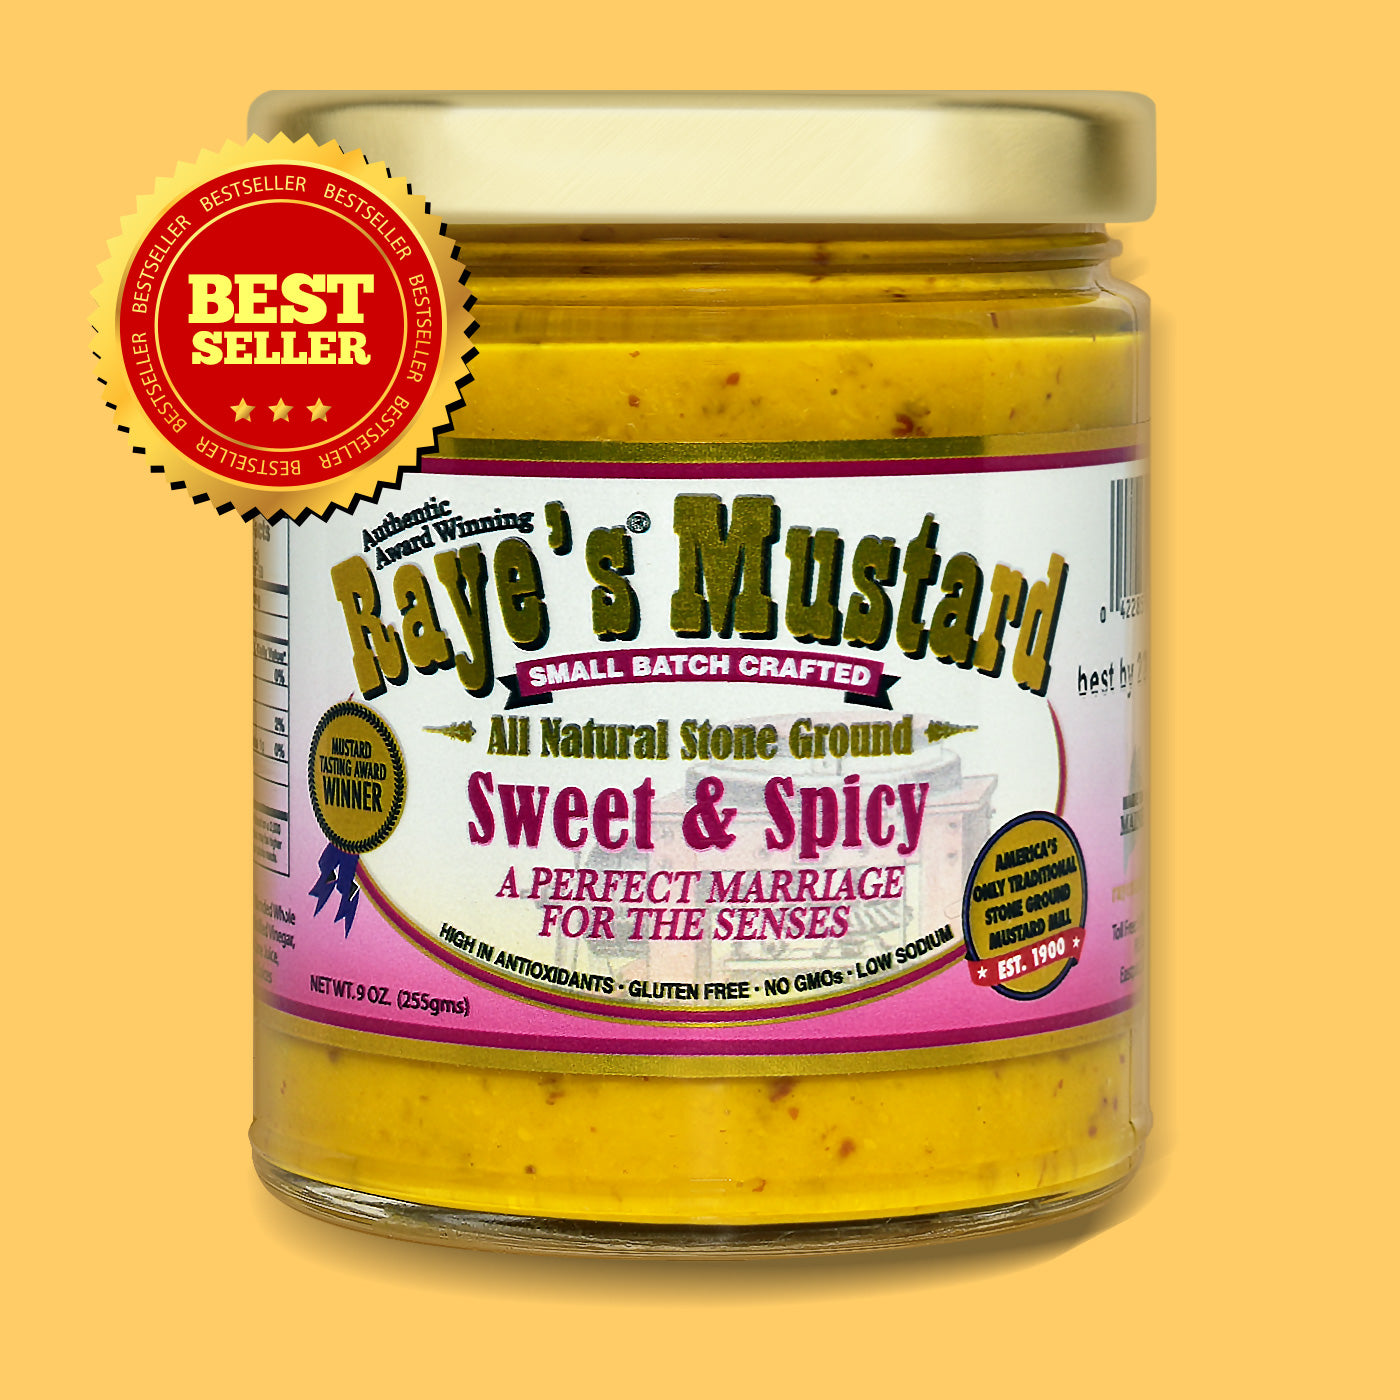 Sweet & Spicy  A Perfect Marriage For The Senses - Raye's Mustard